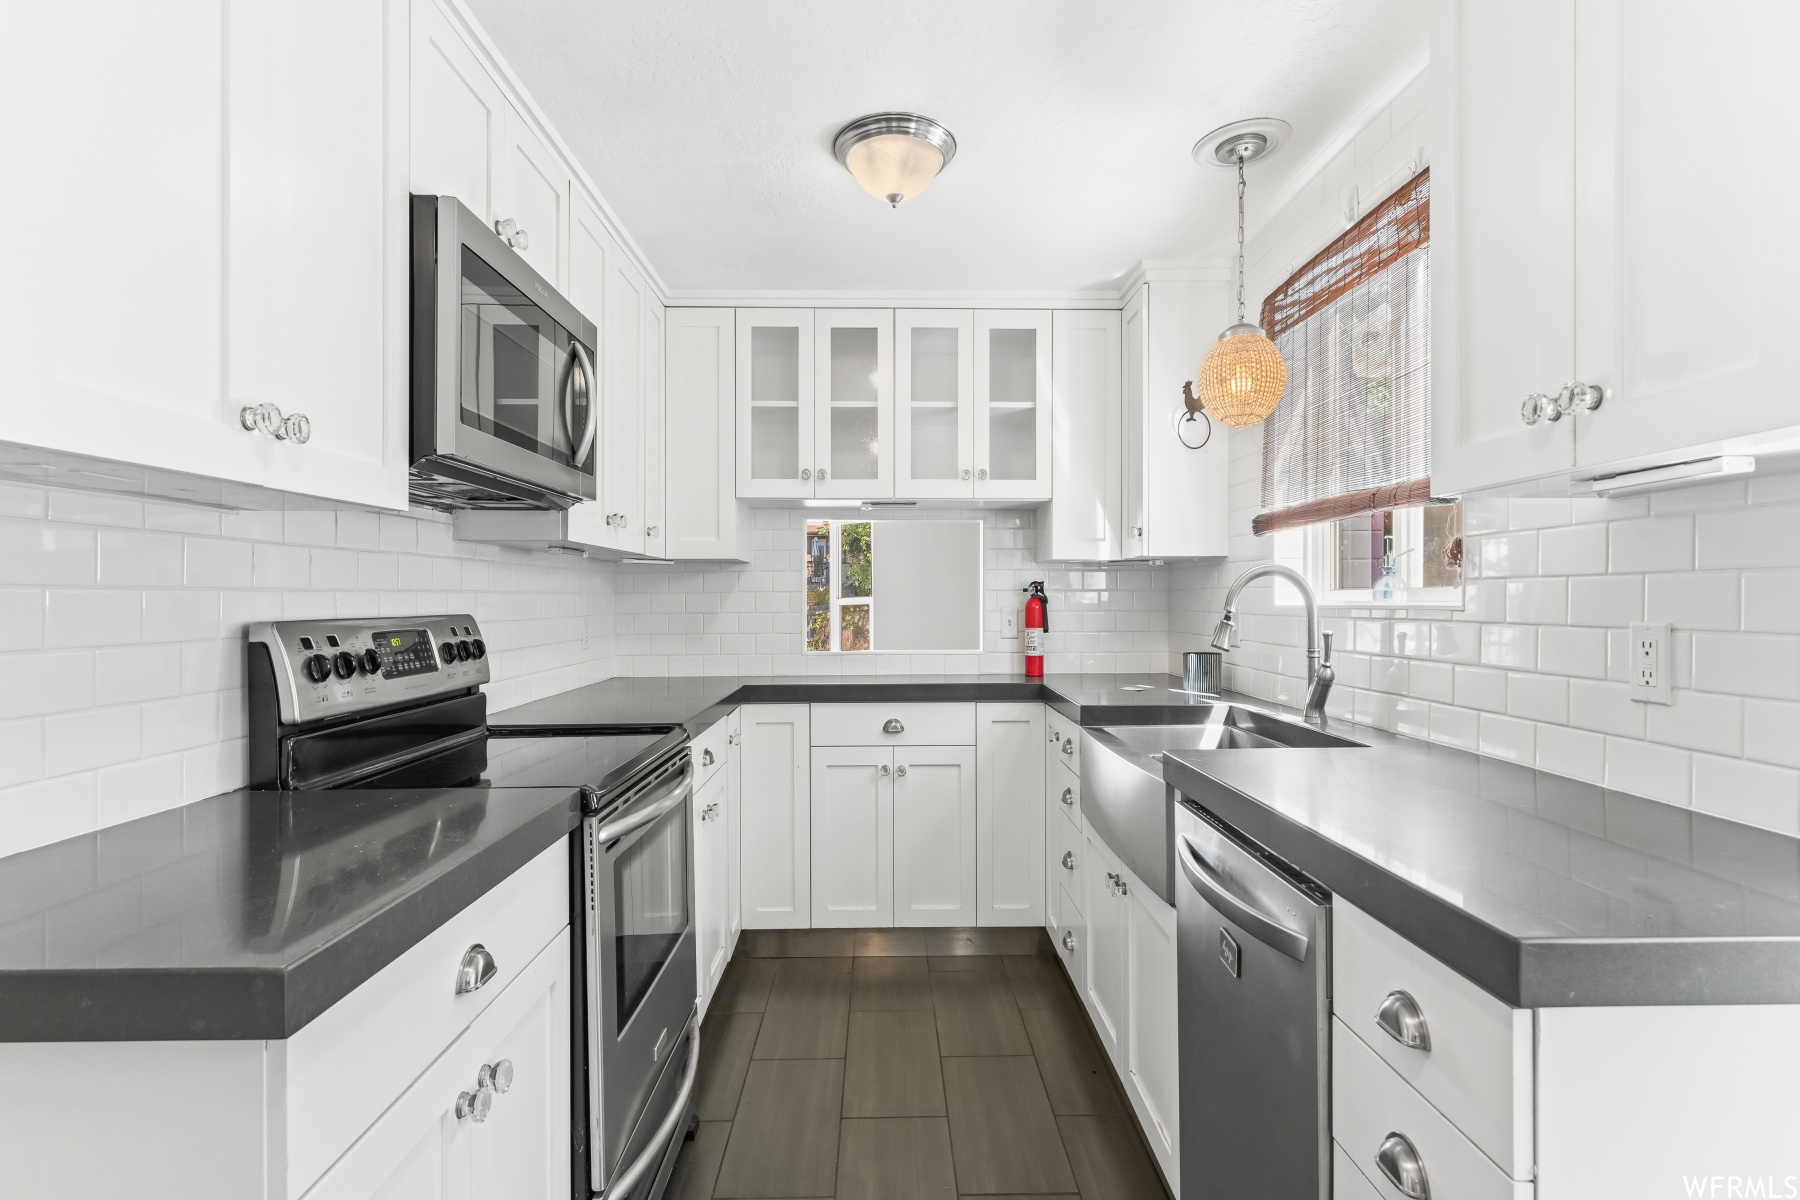 Kitchen featuring white cabinets, backsplash, stainless steel appliances, and light countertops